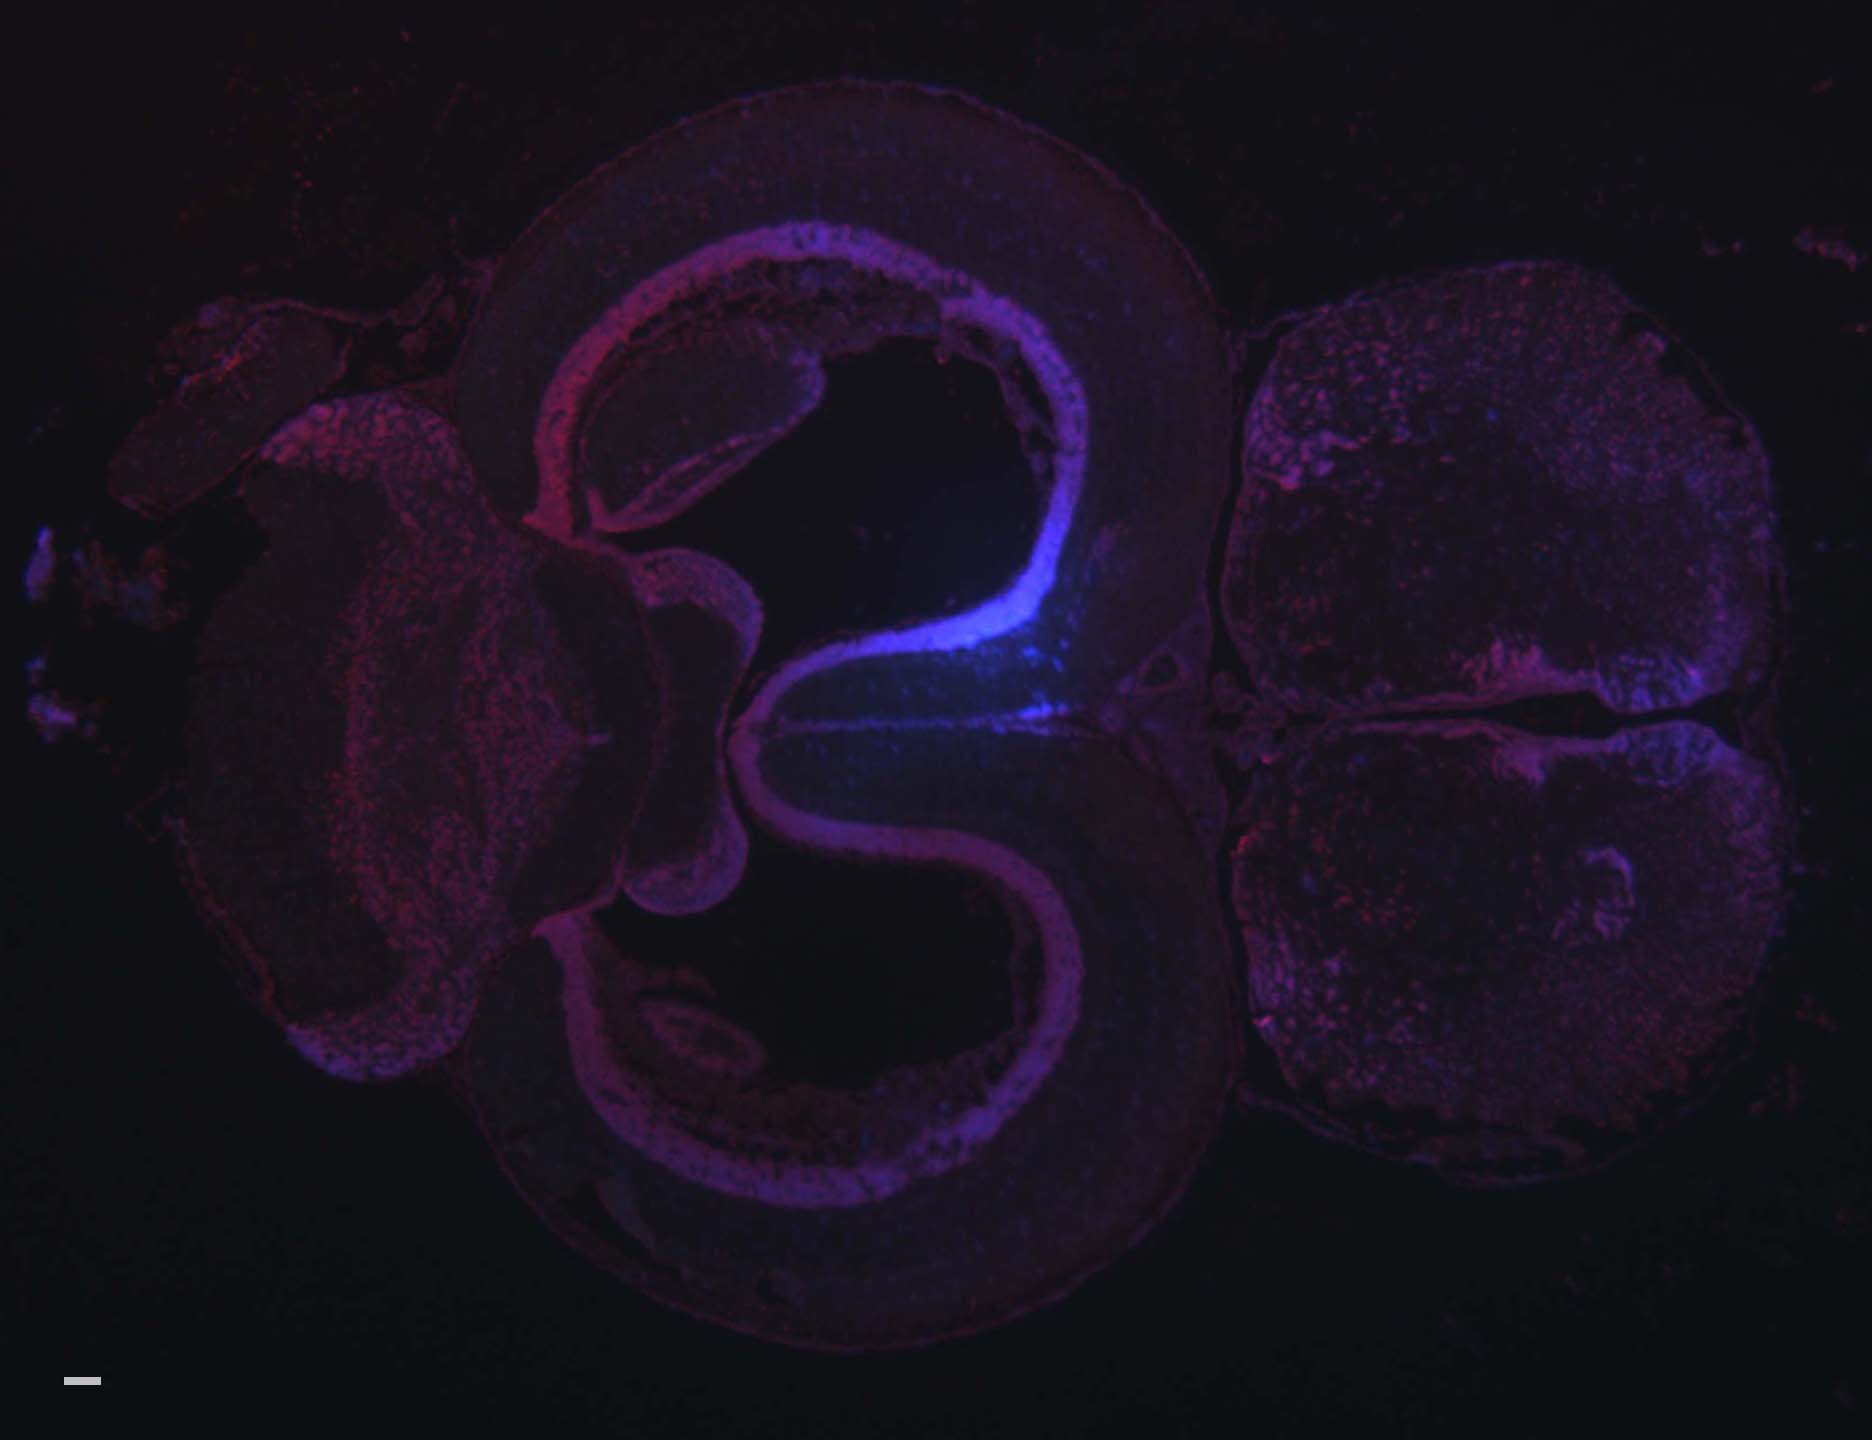 A fluorescent in situ hybridization on a thin slice of a threespine stickleback fish brain. Pink is where the probe can be found while blue labels individual cell nuclei.